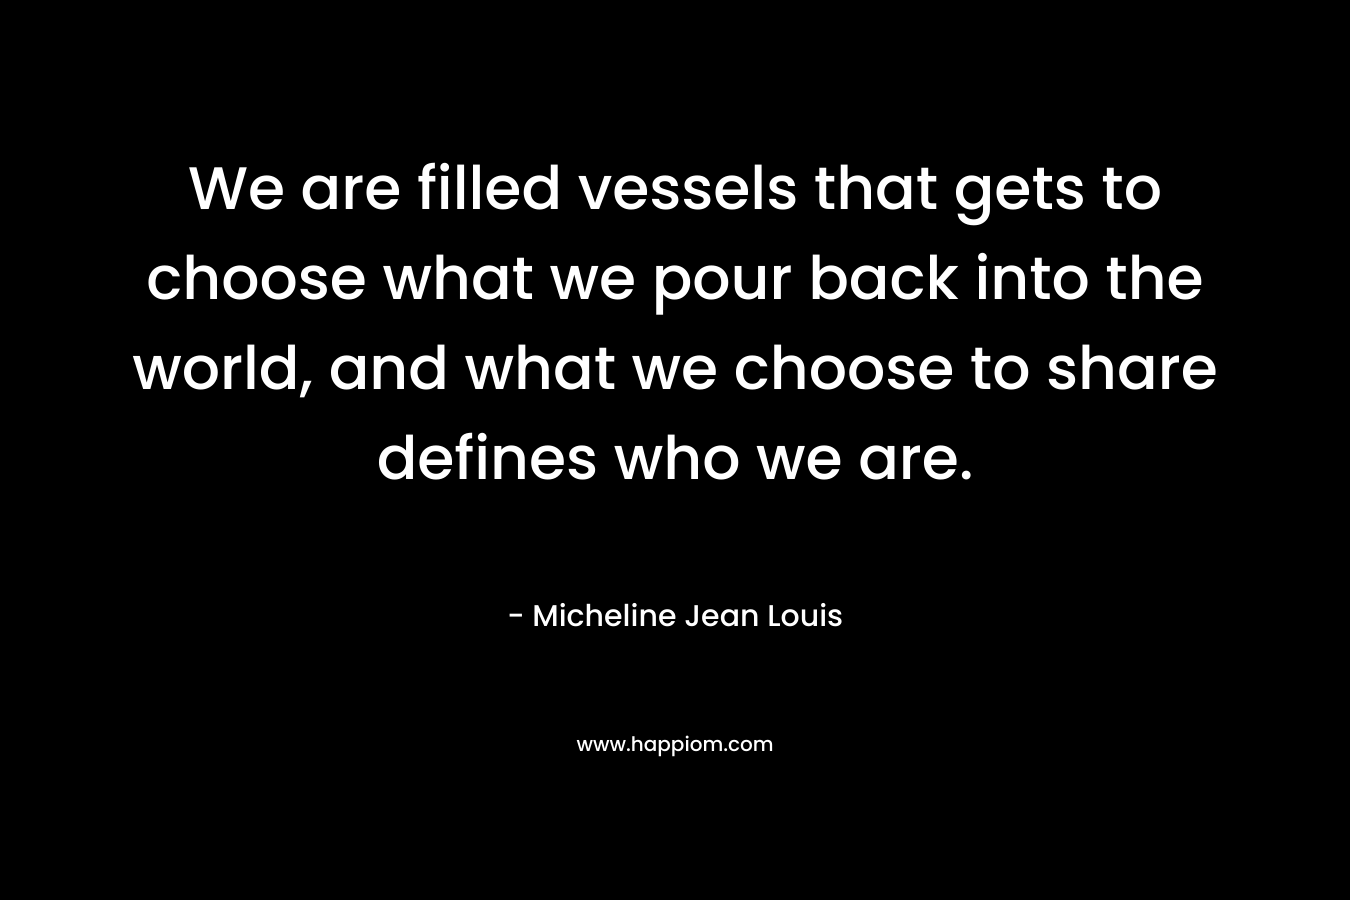 We are filled vessels that gets to choose what we pour back into the world, and what we choose to share defines who we are.